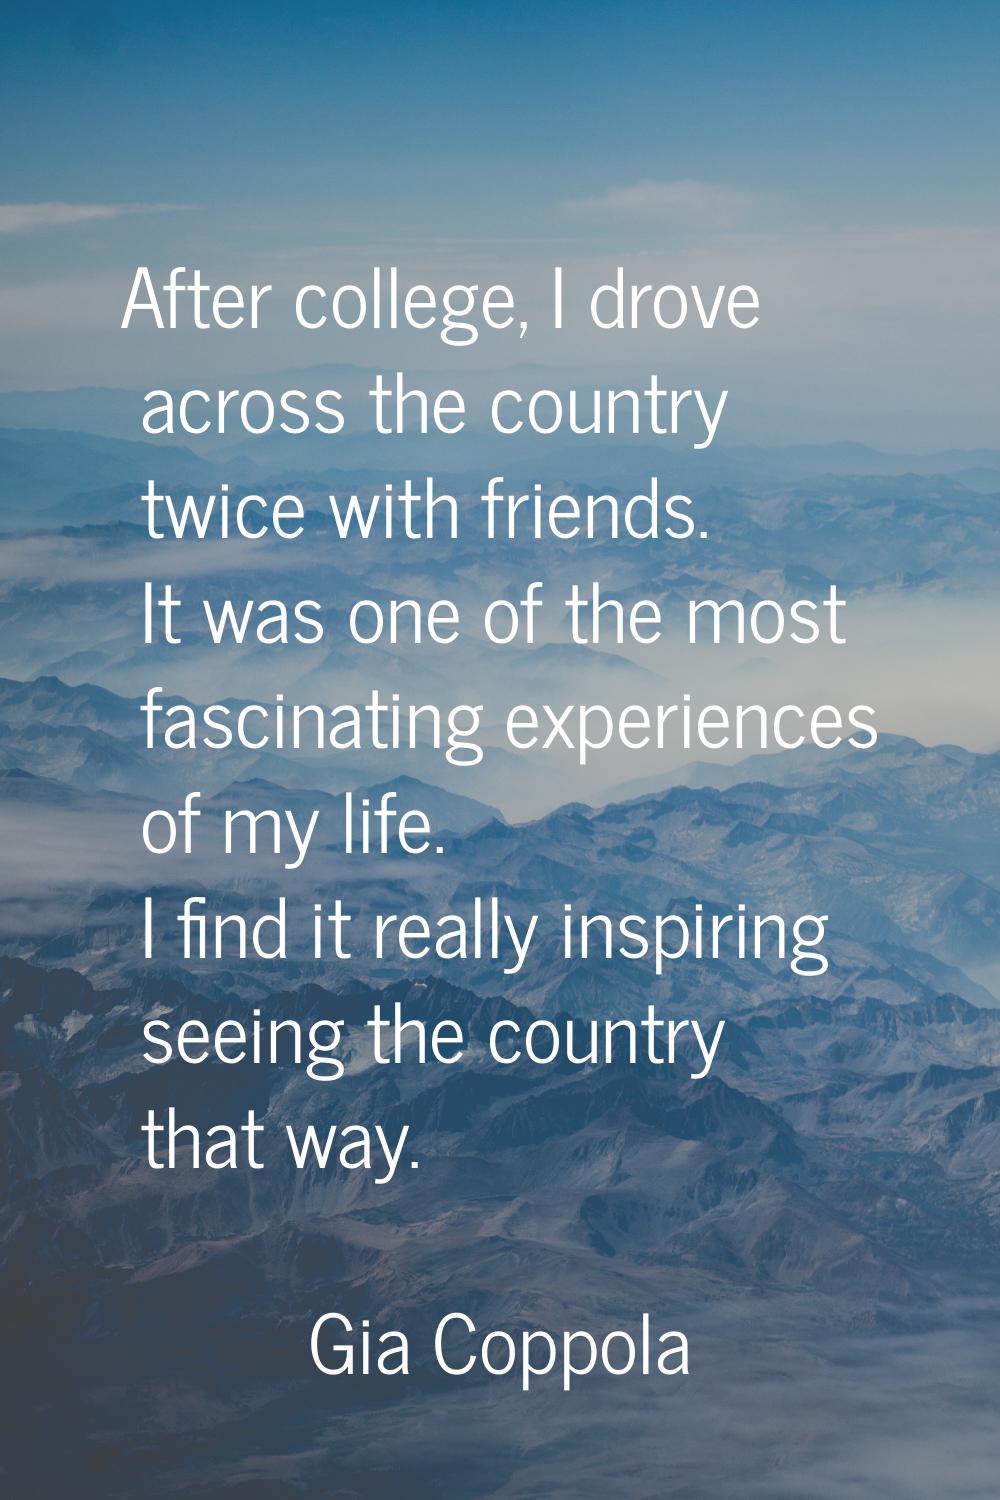 After college, I drove across the country twice with friends. It was one of the most fascinating ex